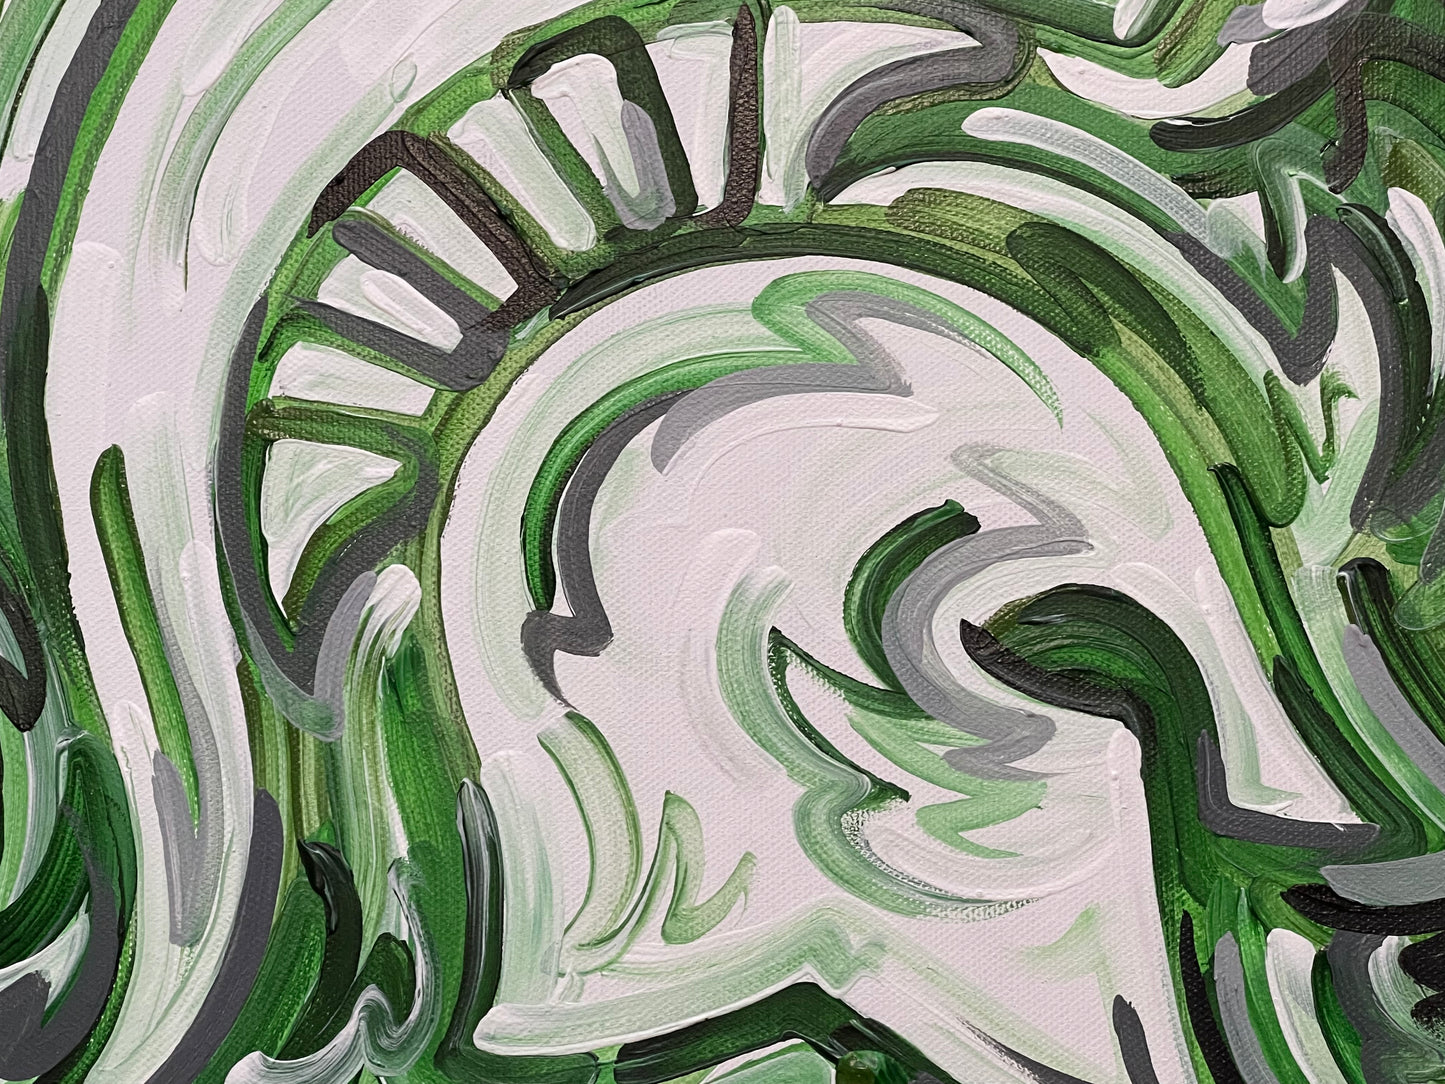 Michigan State University Painting by Justin Patten 12x12 (Finished Painting)